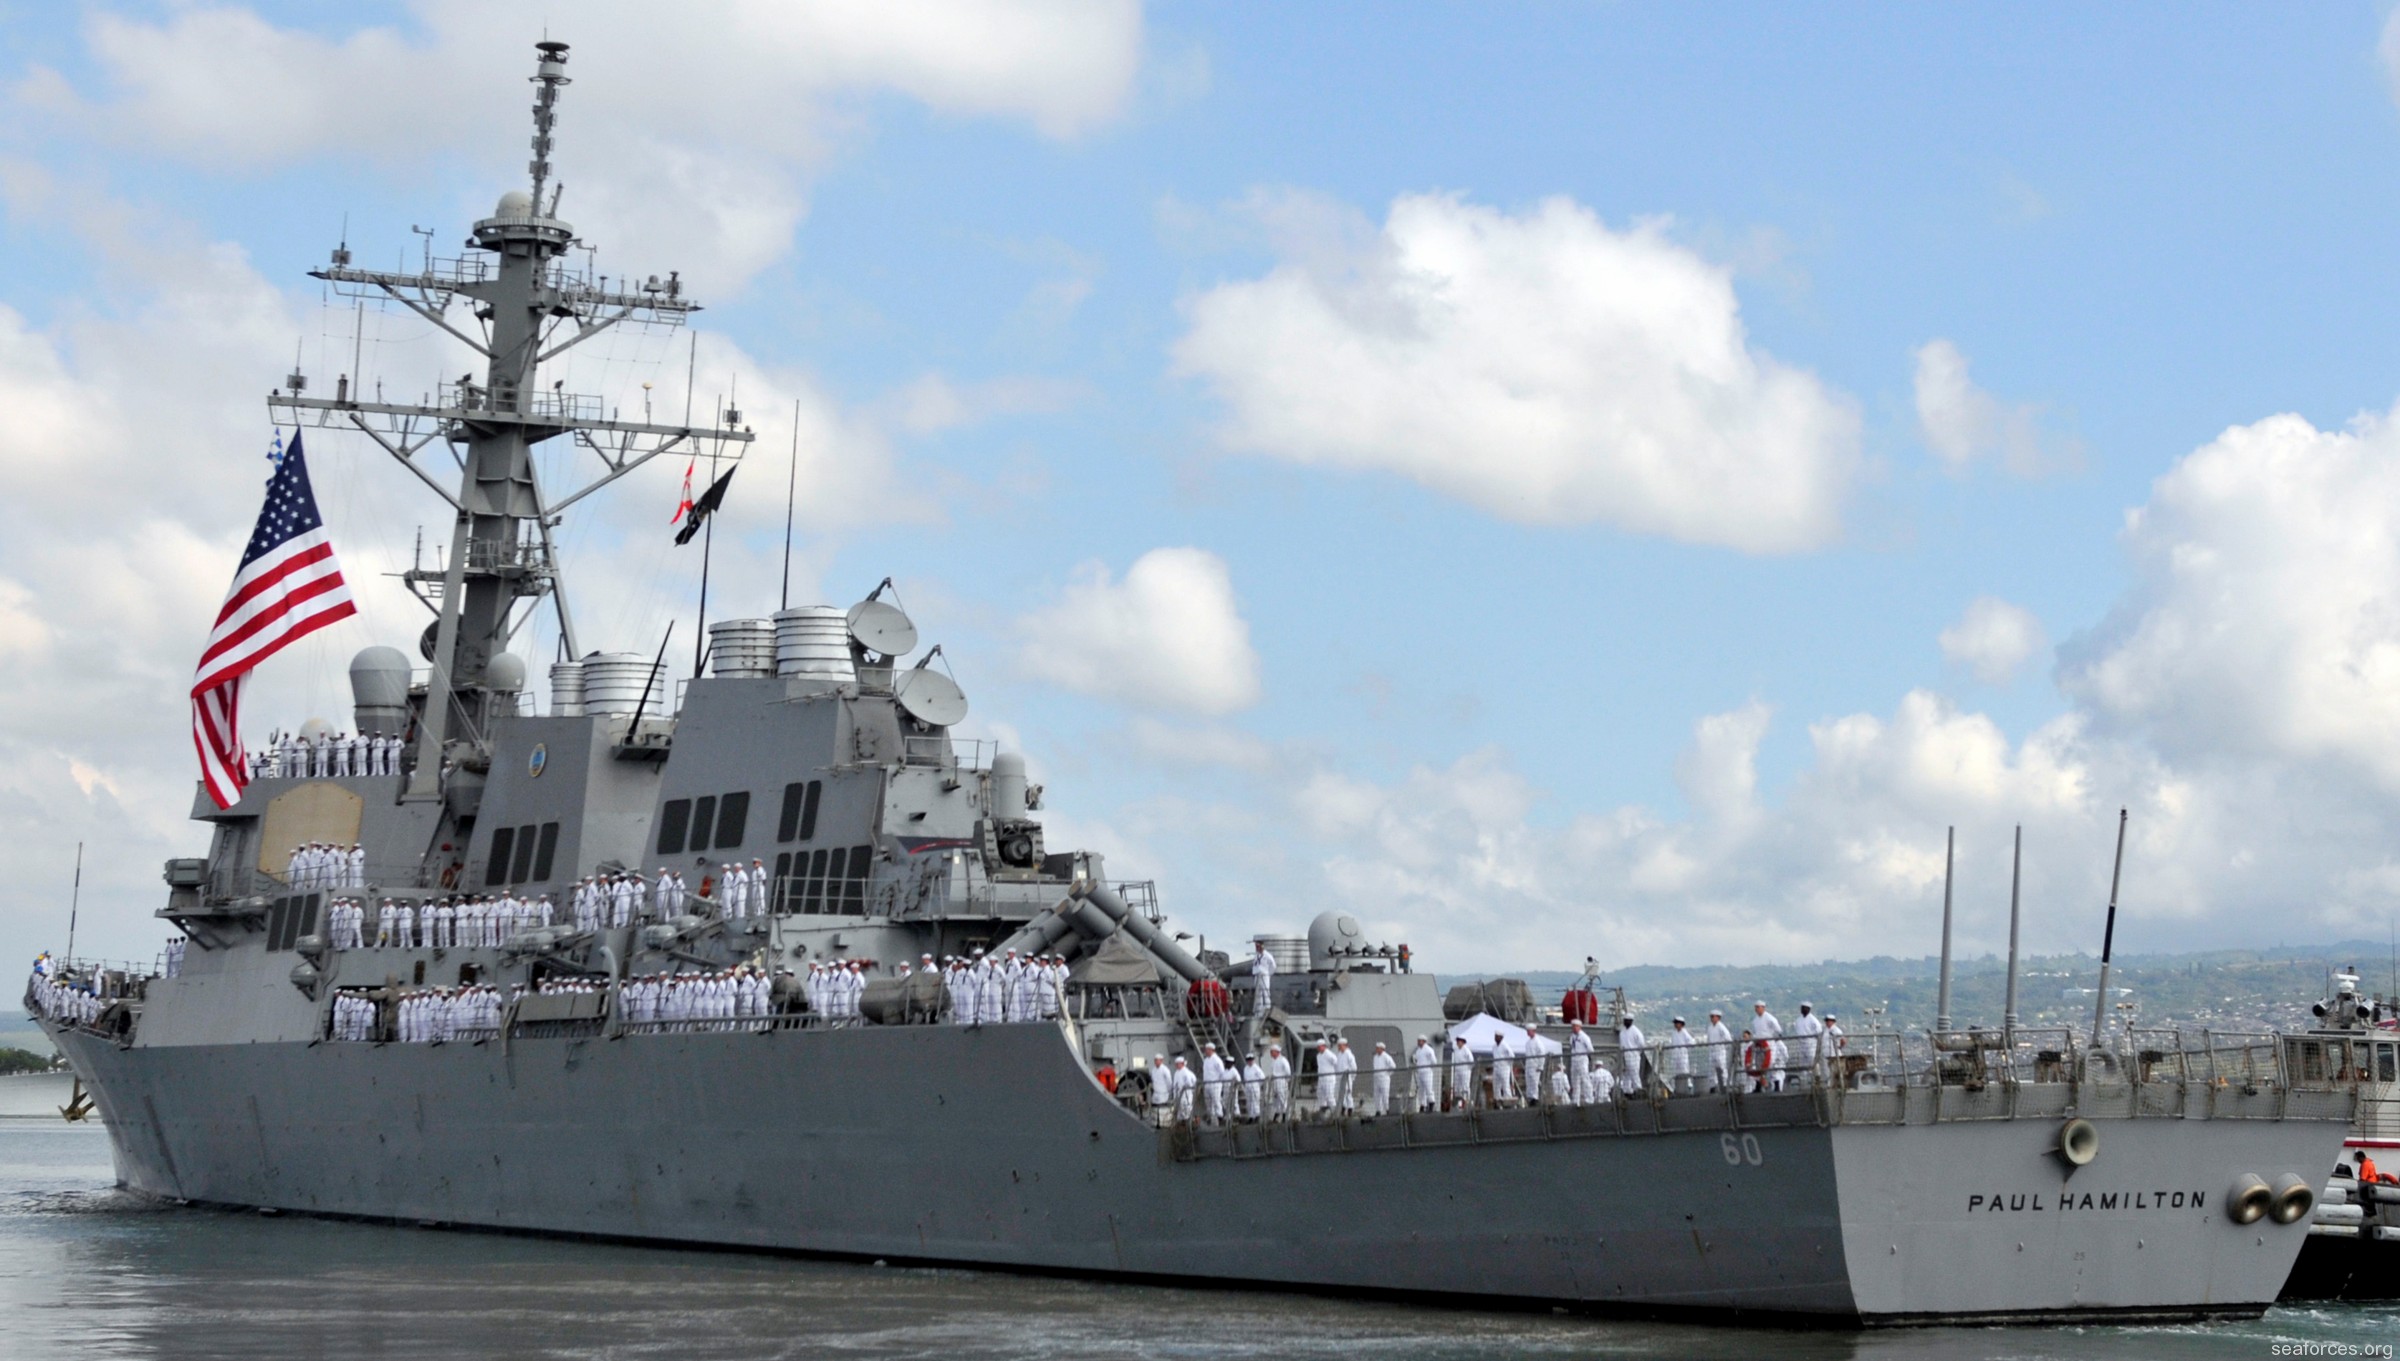 ddg-60 uss paul hamilton guided missile destroyer us navy 11